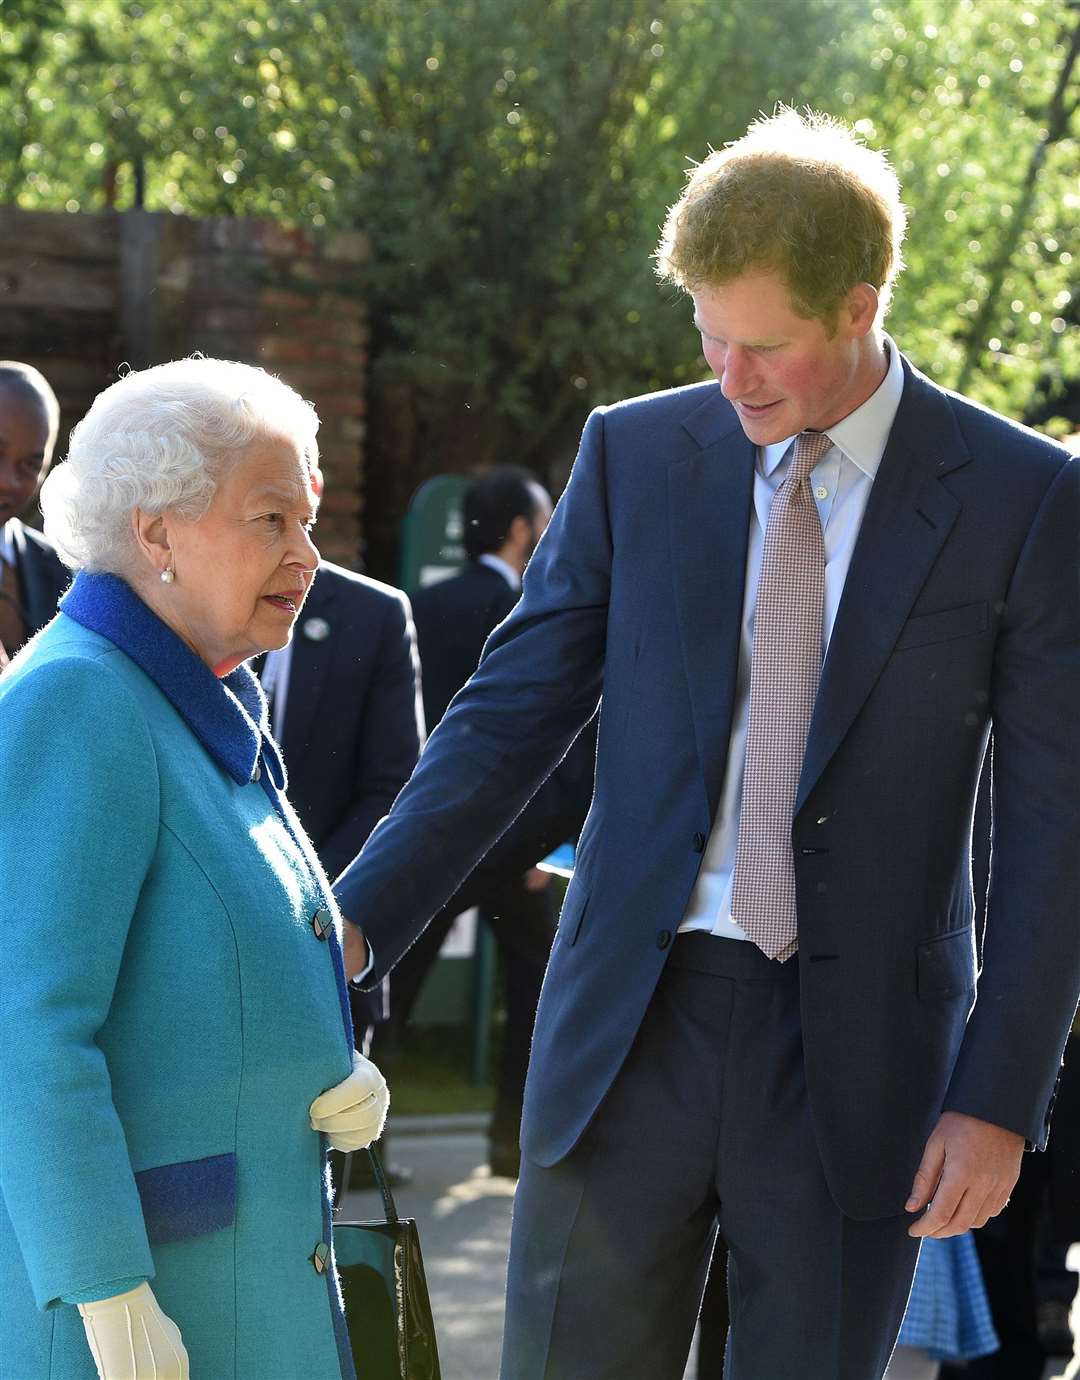 Queen Elizabeth II greets her grandson Prince Harry at Chelsea Flower Show in 2015 (Julian Simmonds/The Daily Telegraph/PA)